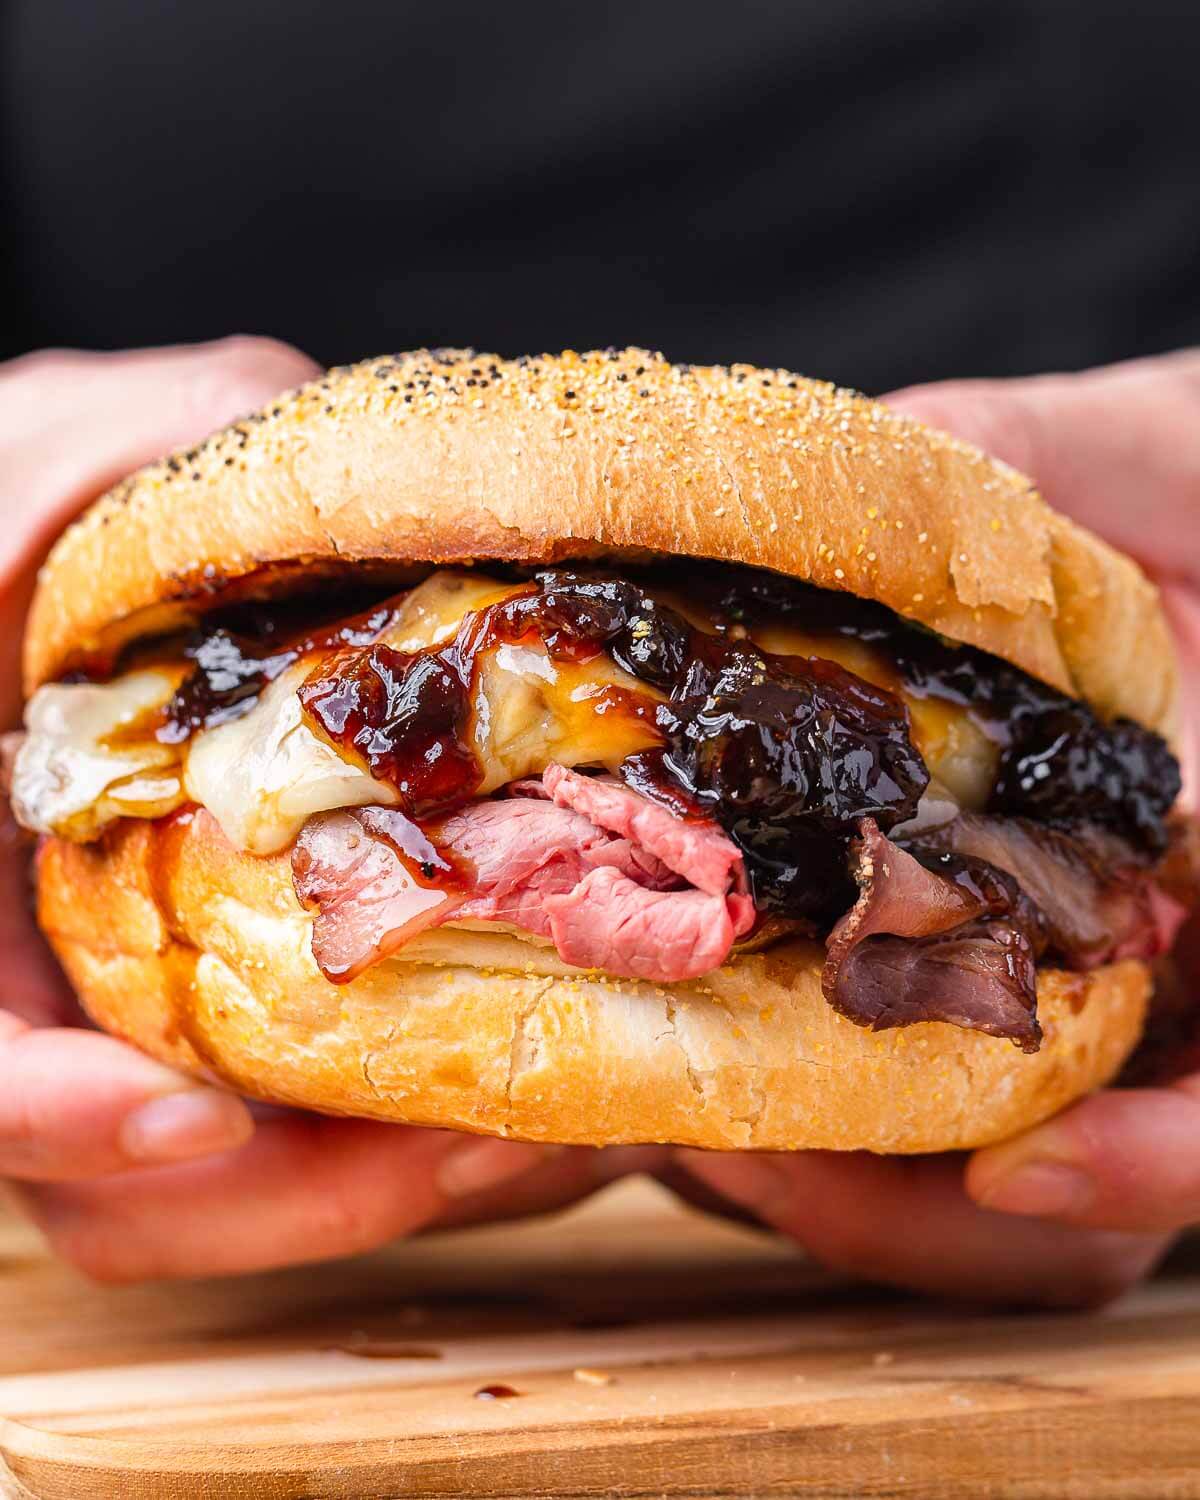 Hands holding roast beef sandwich with onion jam.